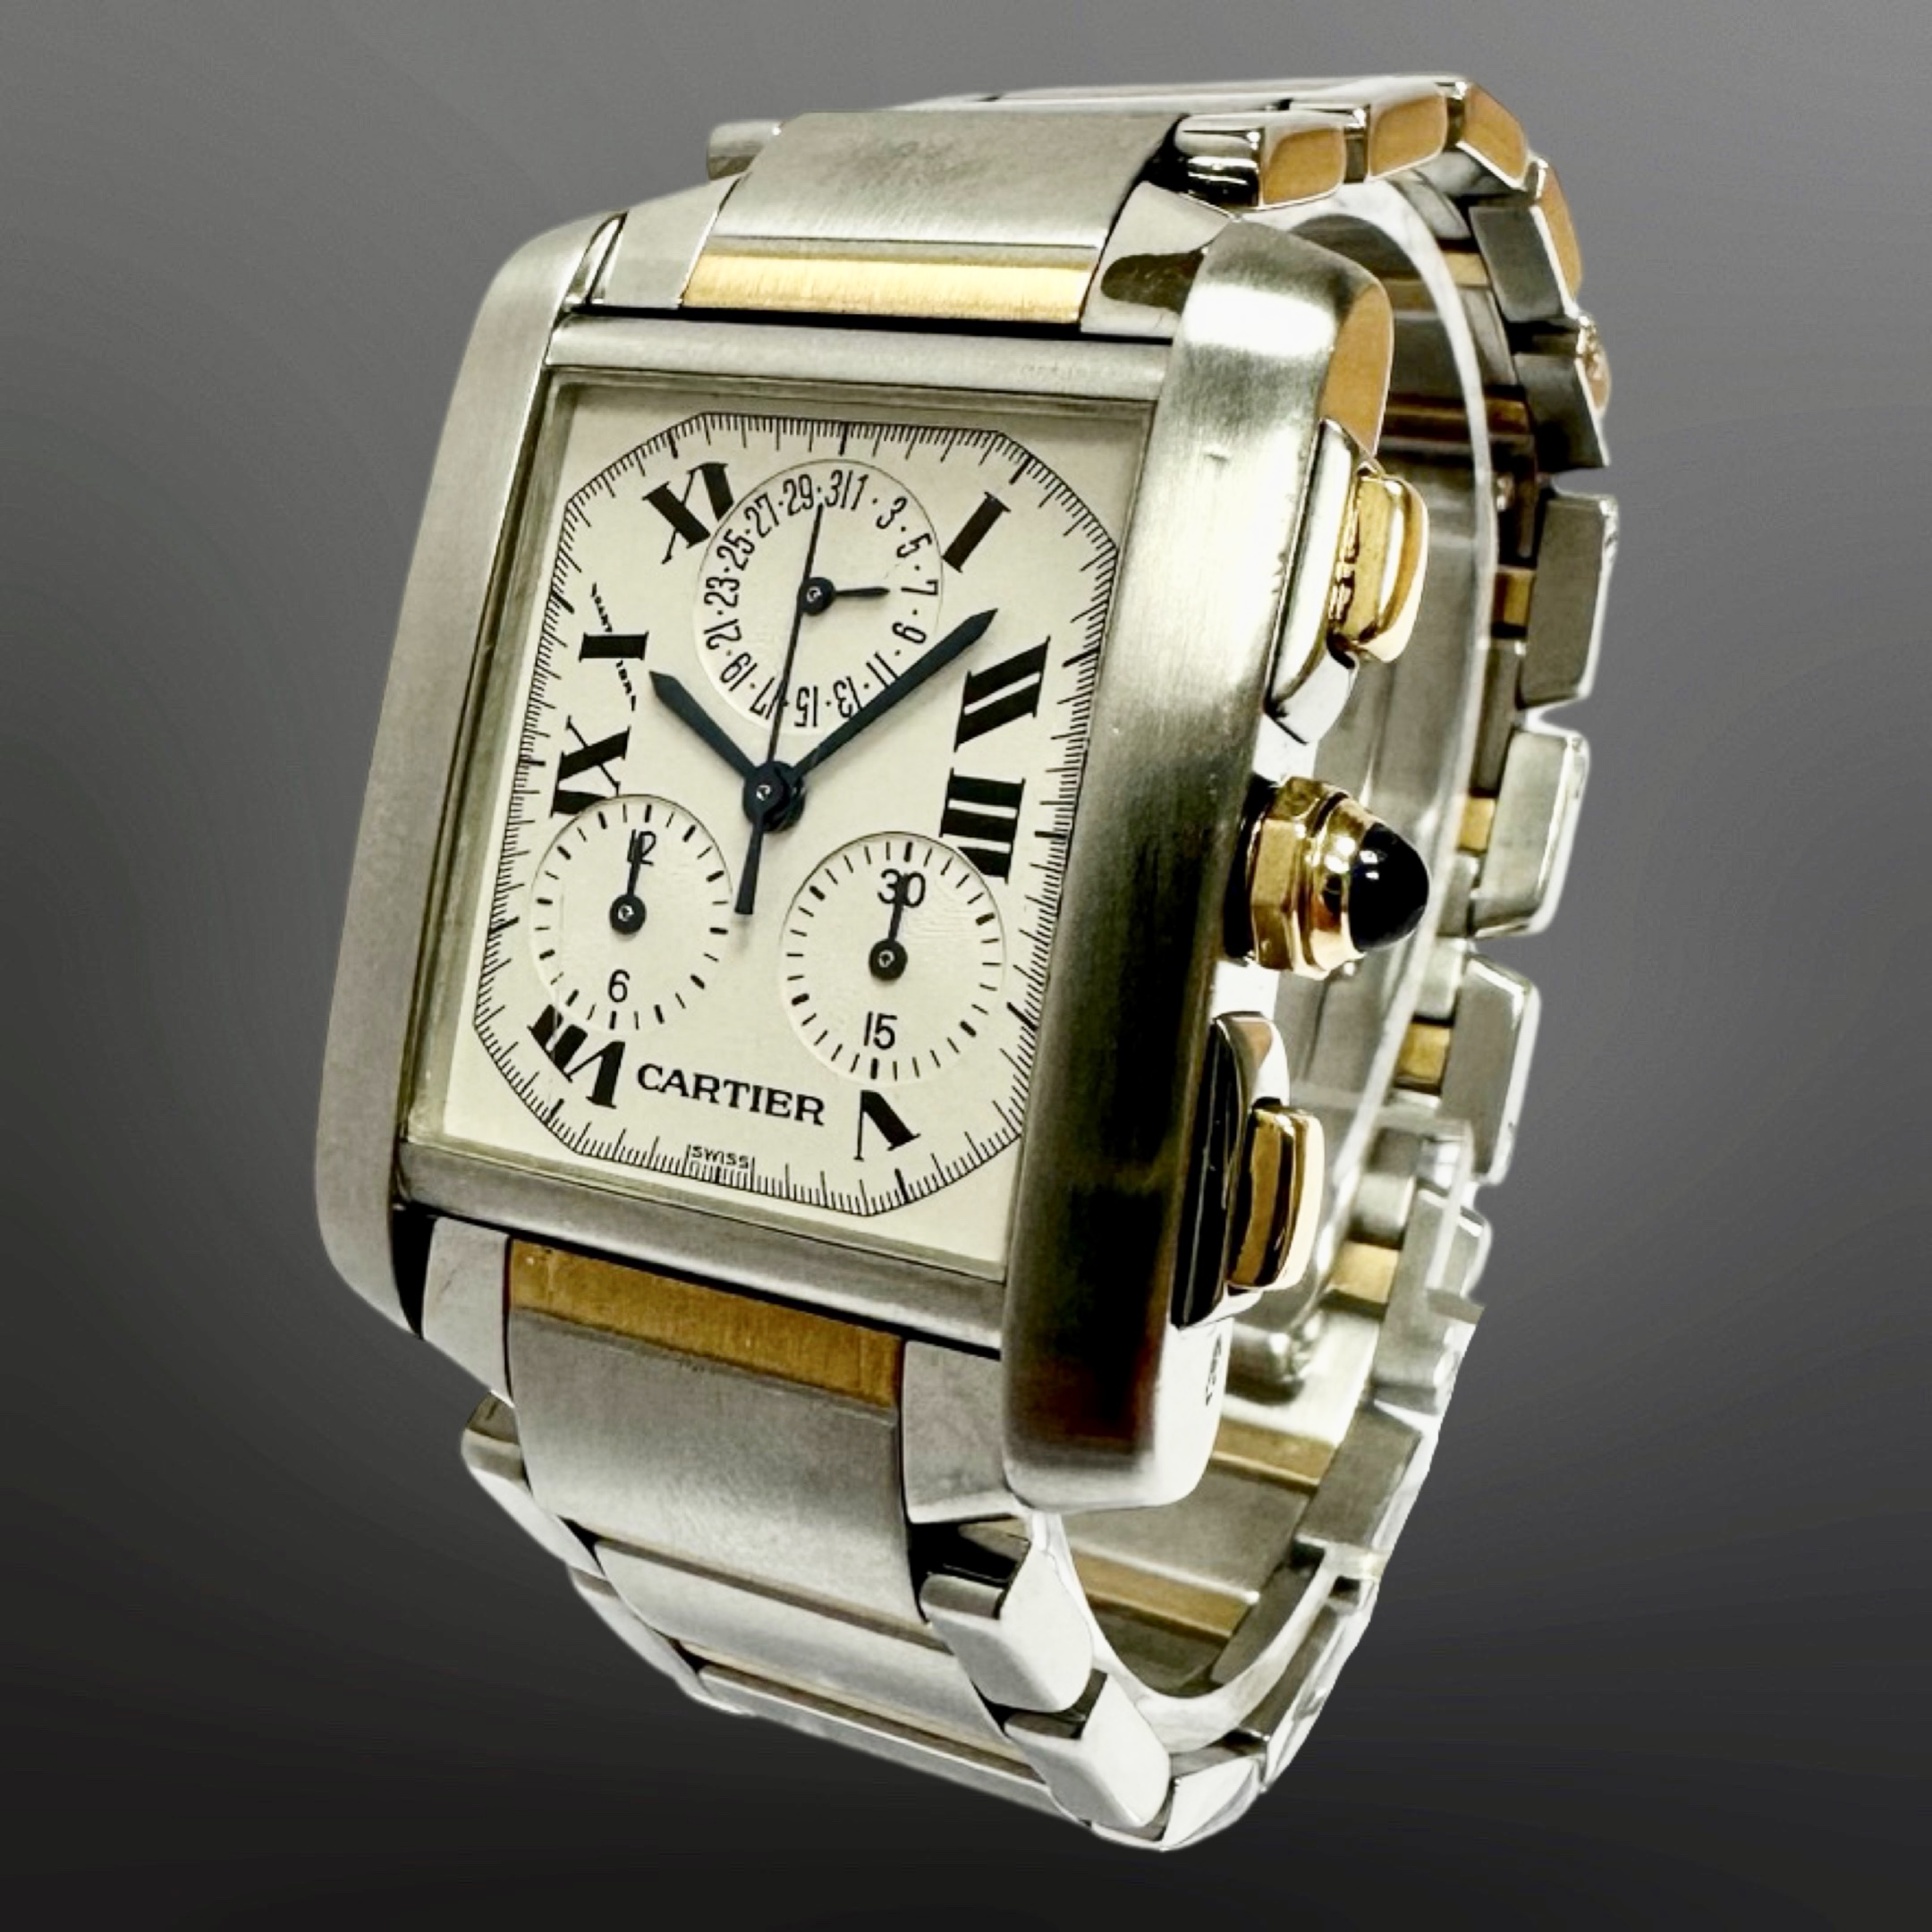 Cartier Tank Francaise 18ct gold and stainless steel quartz chronograph calendar wristwatch, - Image 2 of 6